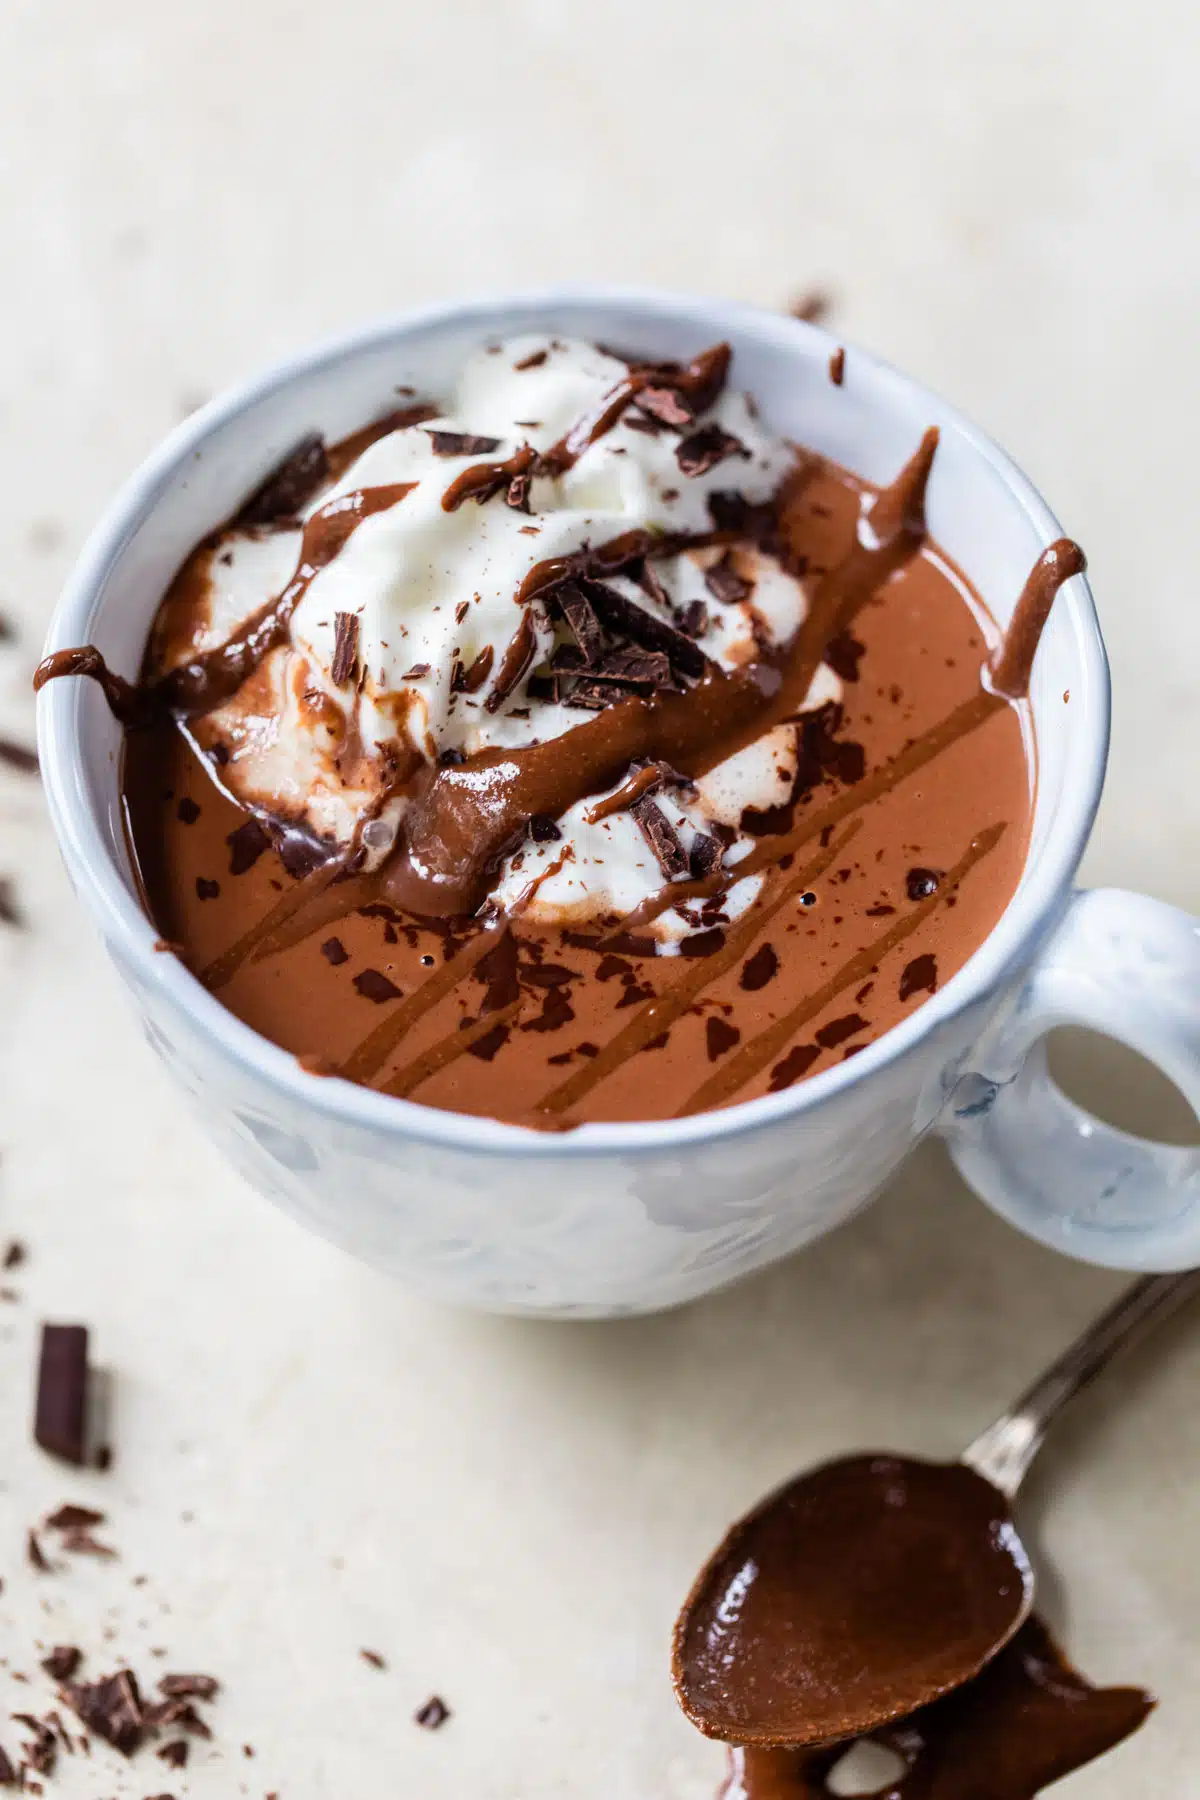 mug of hot chocolate with whipped cream and melted chocolate